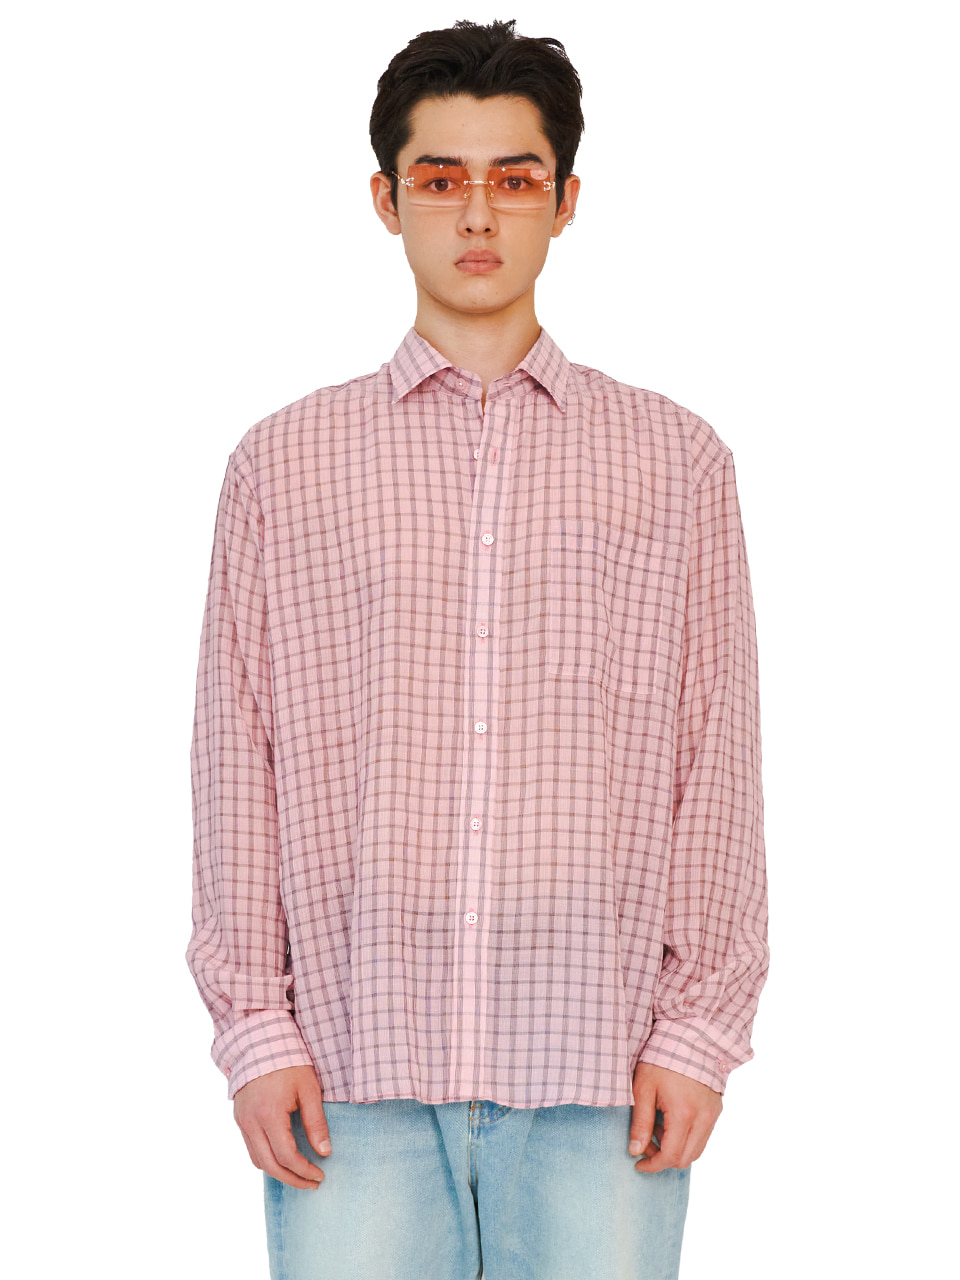 OVERFIT ESSENTIAL CHECK SHIRTS_[PINK]